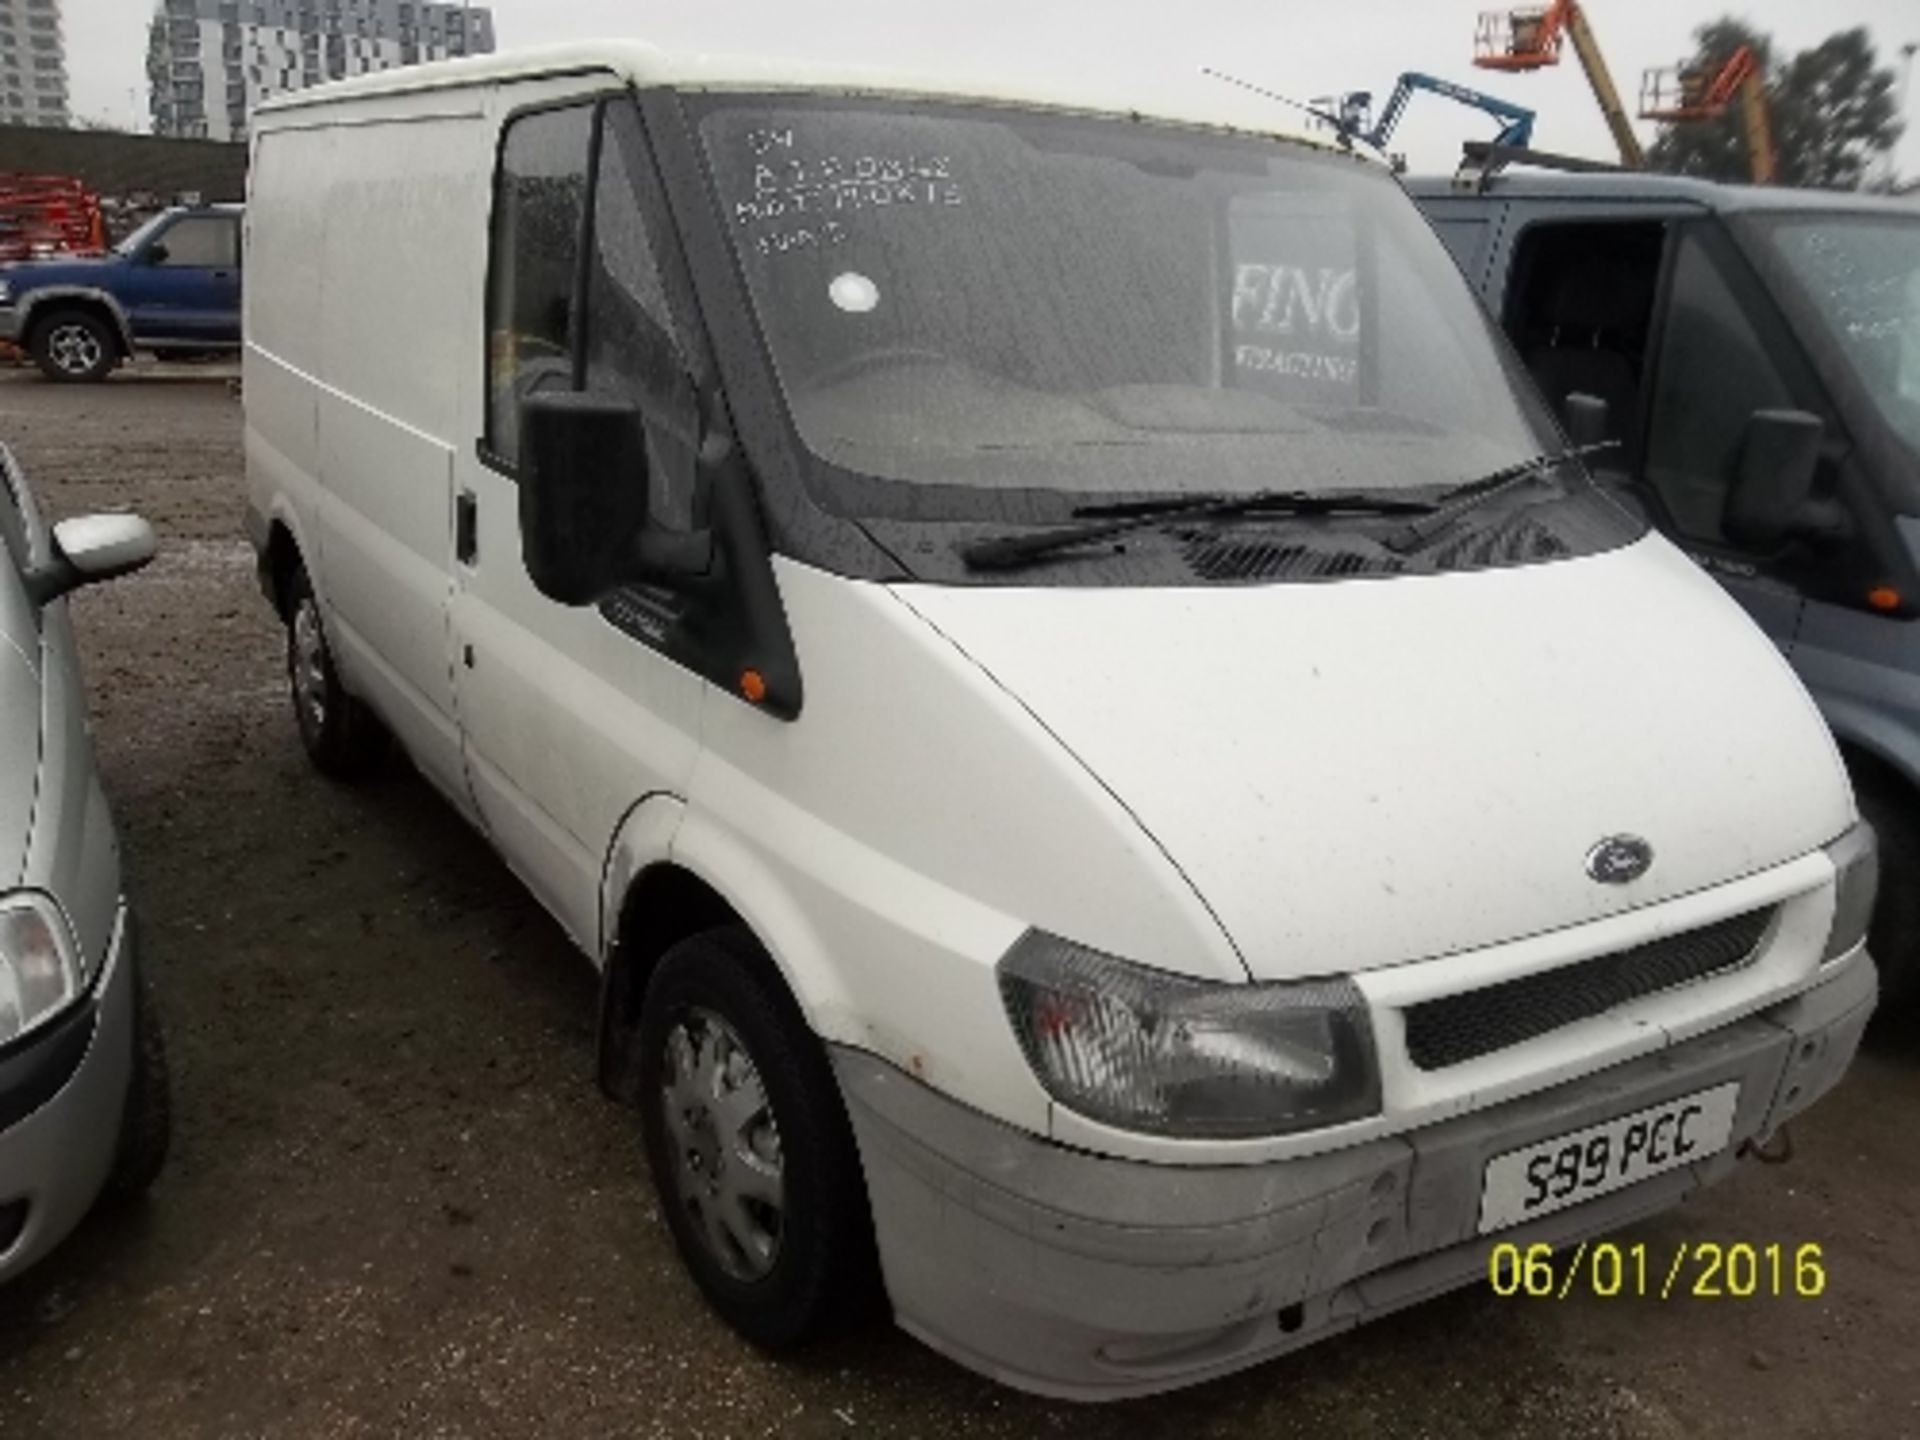 Ford Transit 260 SWB Panel Van - S99 PCC This vehicle may be purchased only by the holder of an - Image 2 of 4